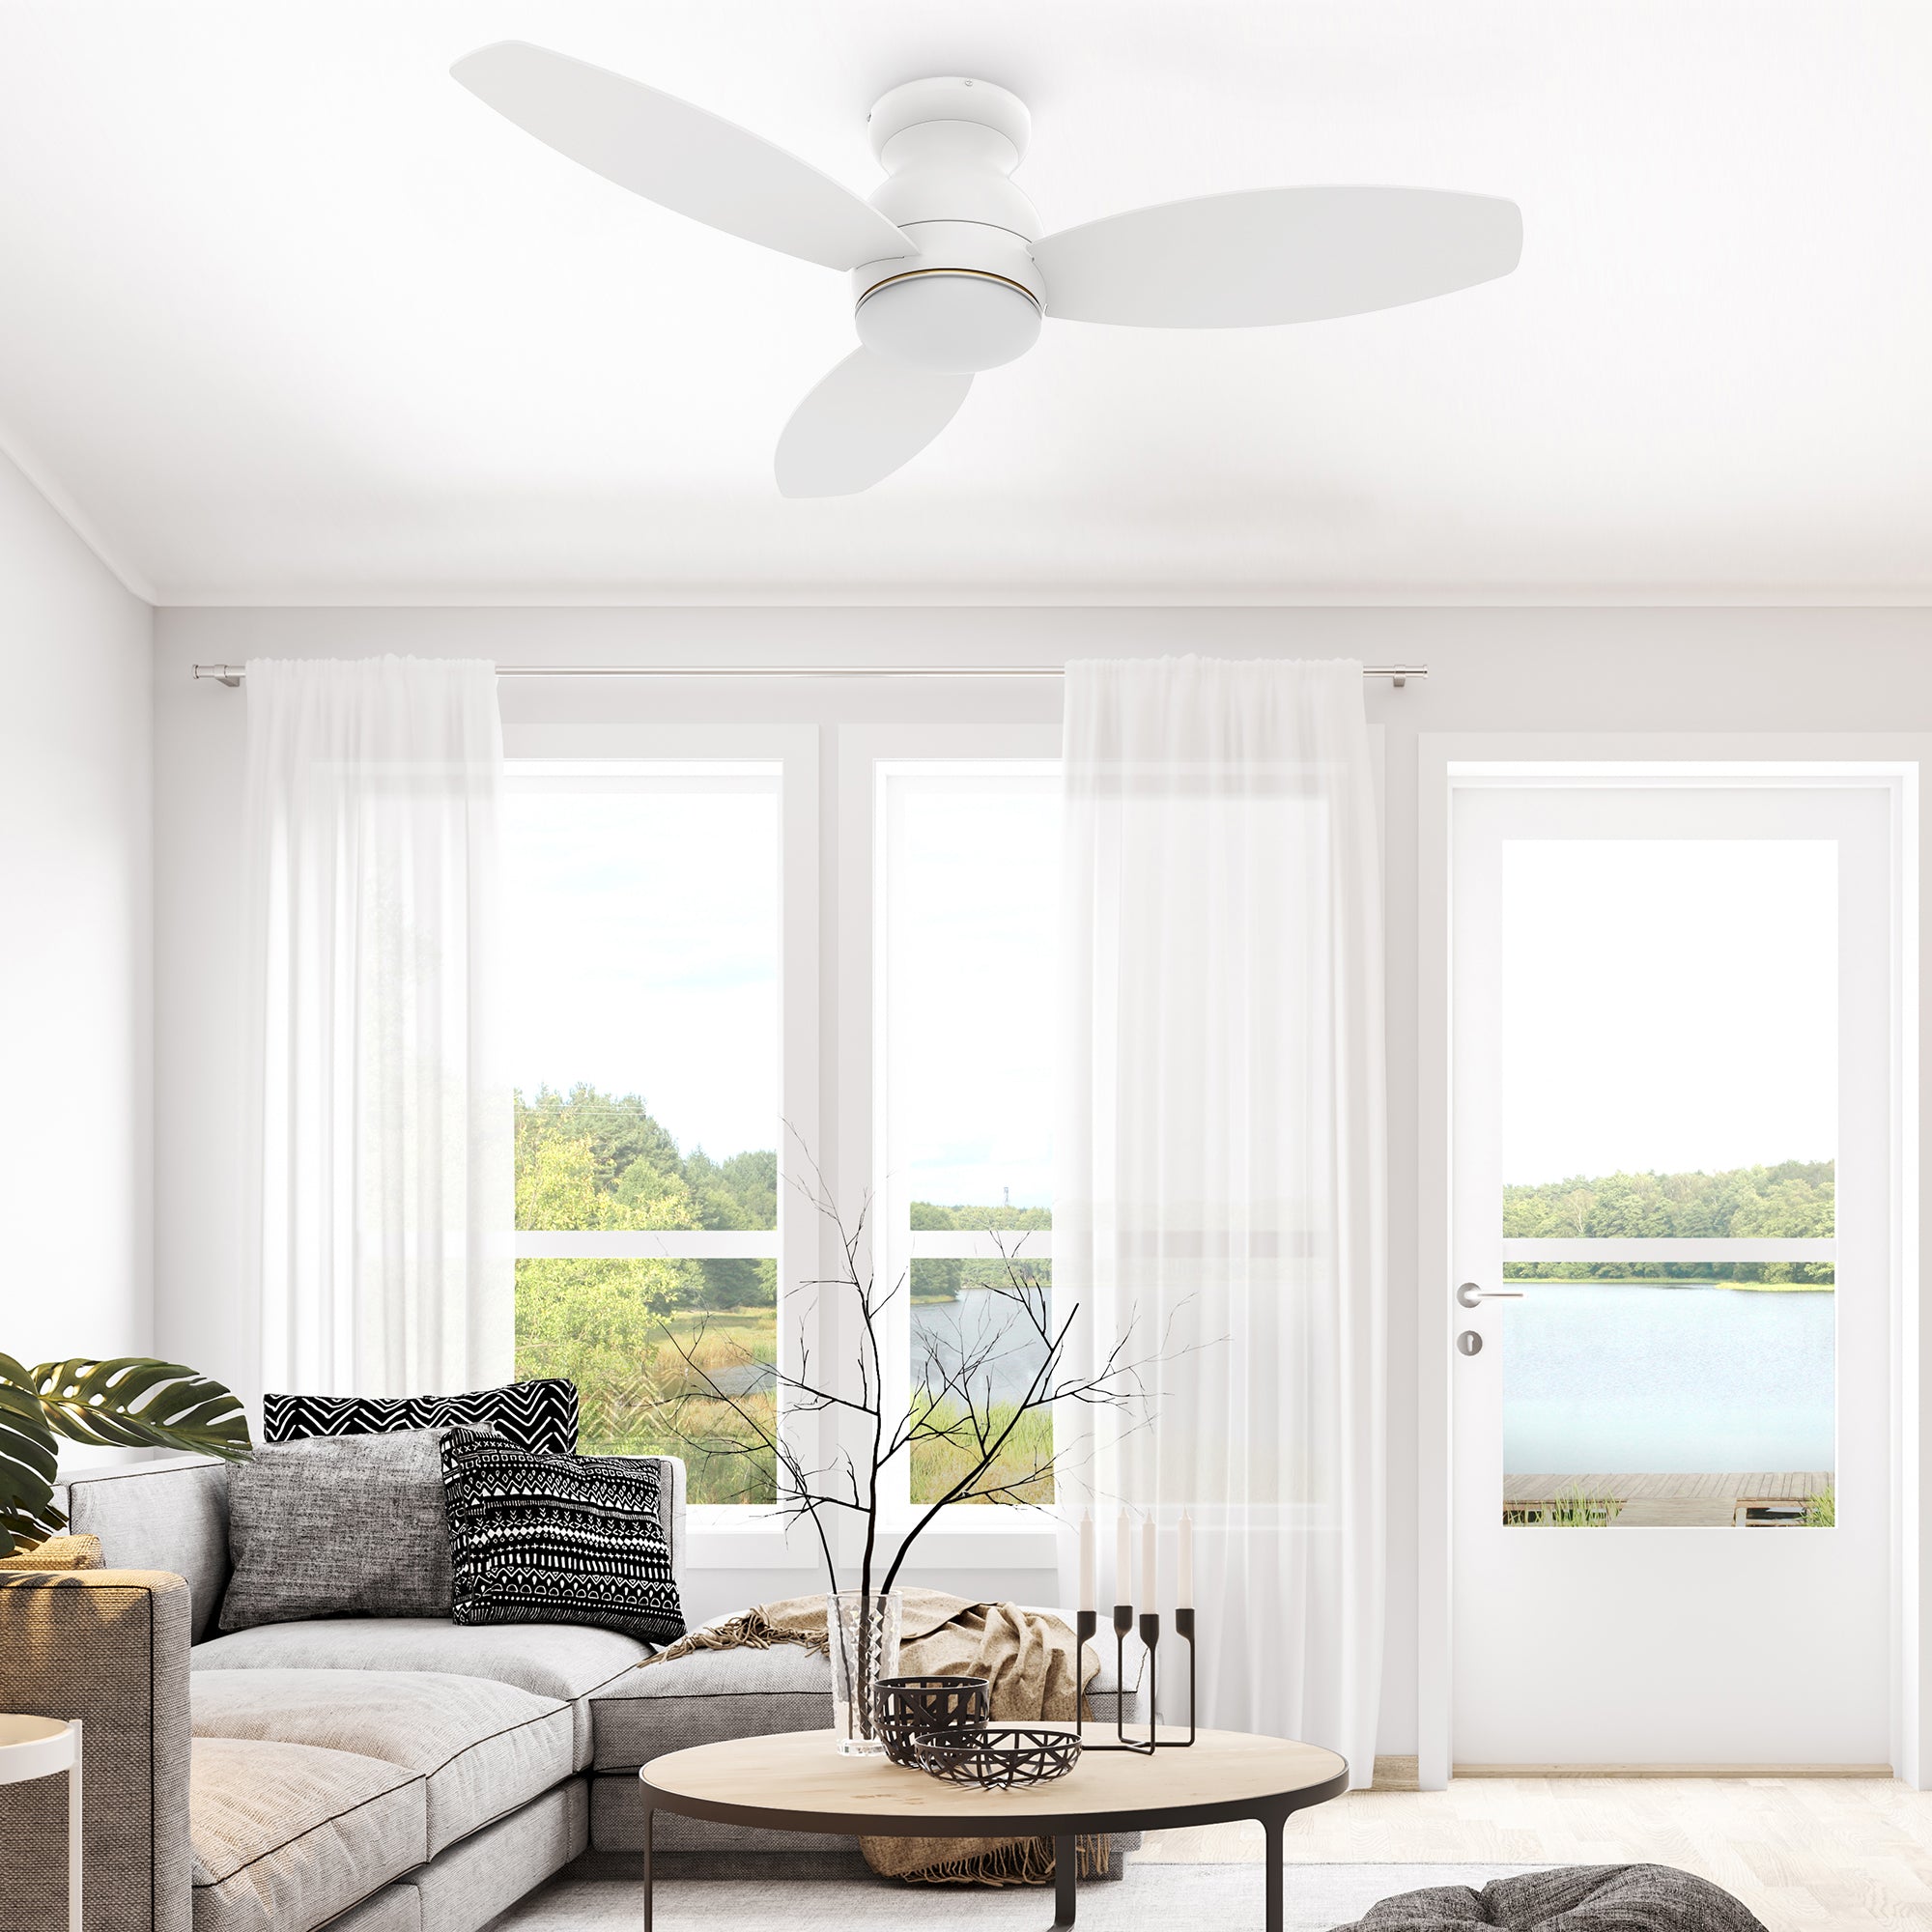 The Smafan 44&#39;&#39; Trendsetter smart ceiling fan keeps your space cool, bright, and stylish. It is a soft modern masterpiece perfect for your large indoor living spaces. This Wifi smart ceiling fan is a simplicity designing with Black finish, use elegant Plywood blades and has an integrated 4000K LED daylight. The fan features Remote control, Wi-Fi apps, Siri Shortcut and Voice control technology (compatible with Amazon Alexa and Google Home Assistant ) to set fan preferences.